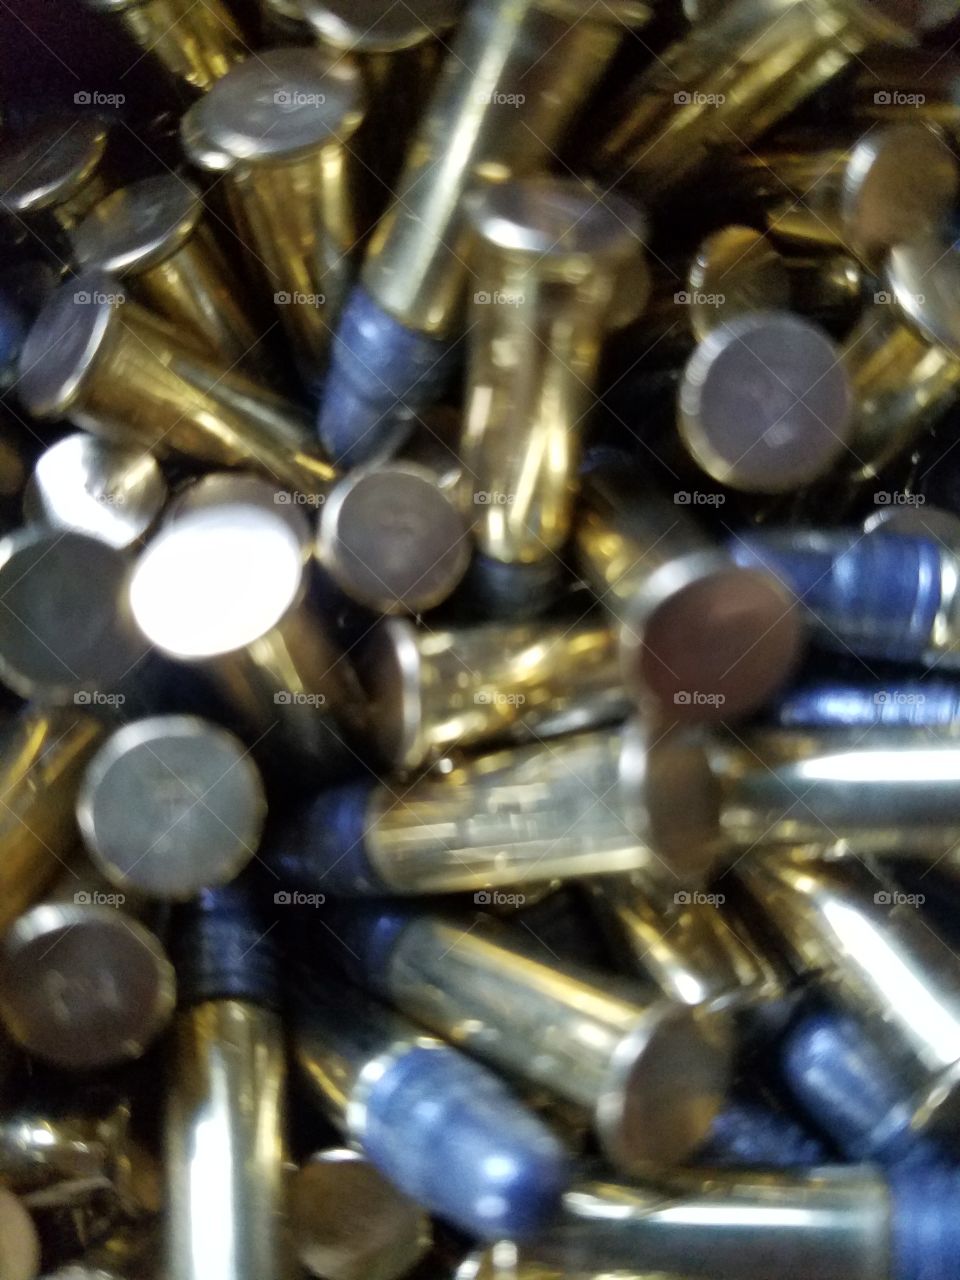 Ammo cluster